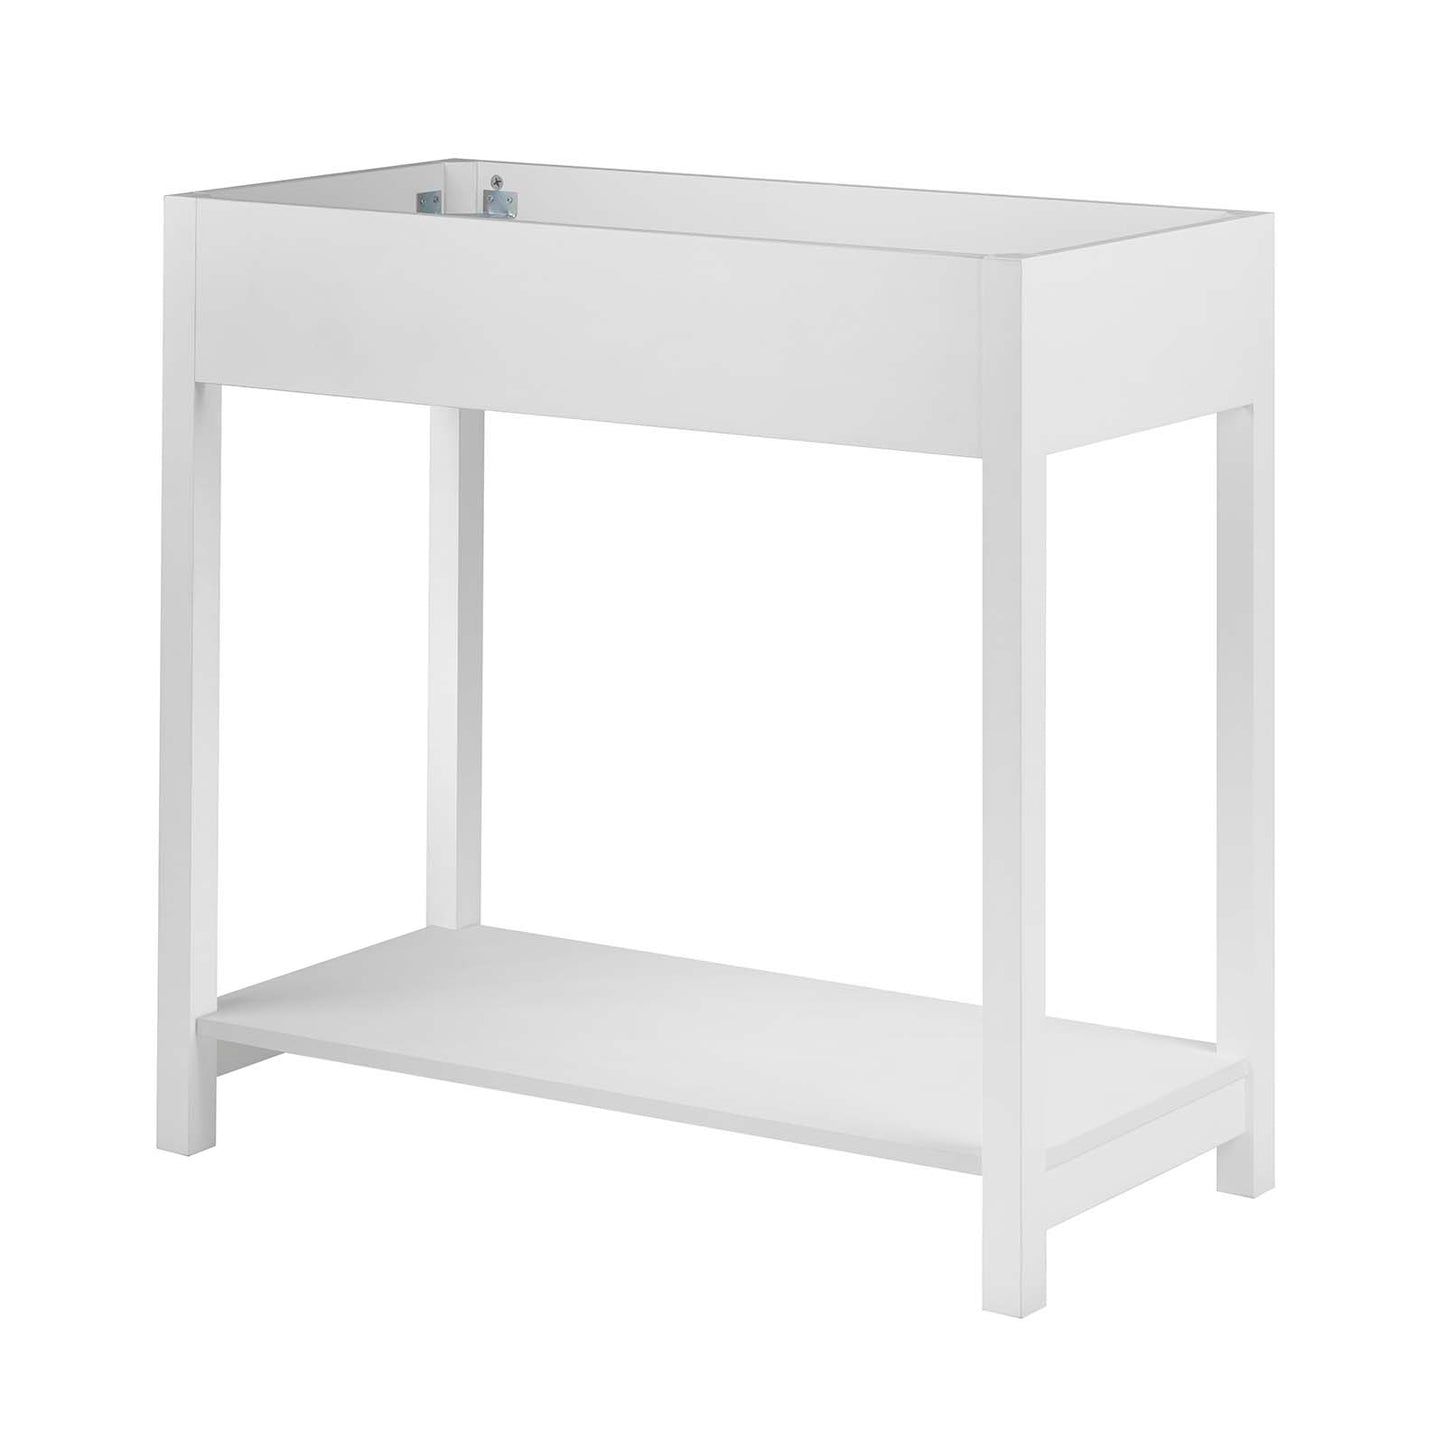 Altura 36" Bathroom Vanity Cabinet (Sink Basin Not Included) White EEI-5876-WHI